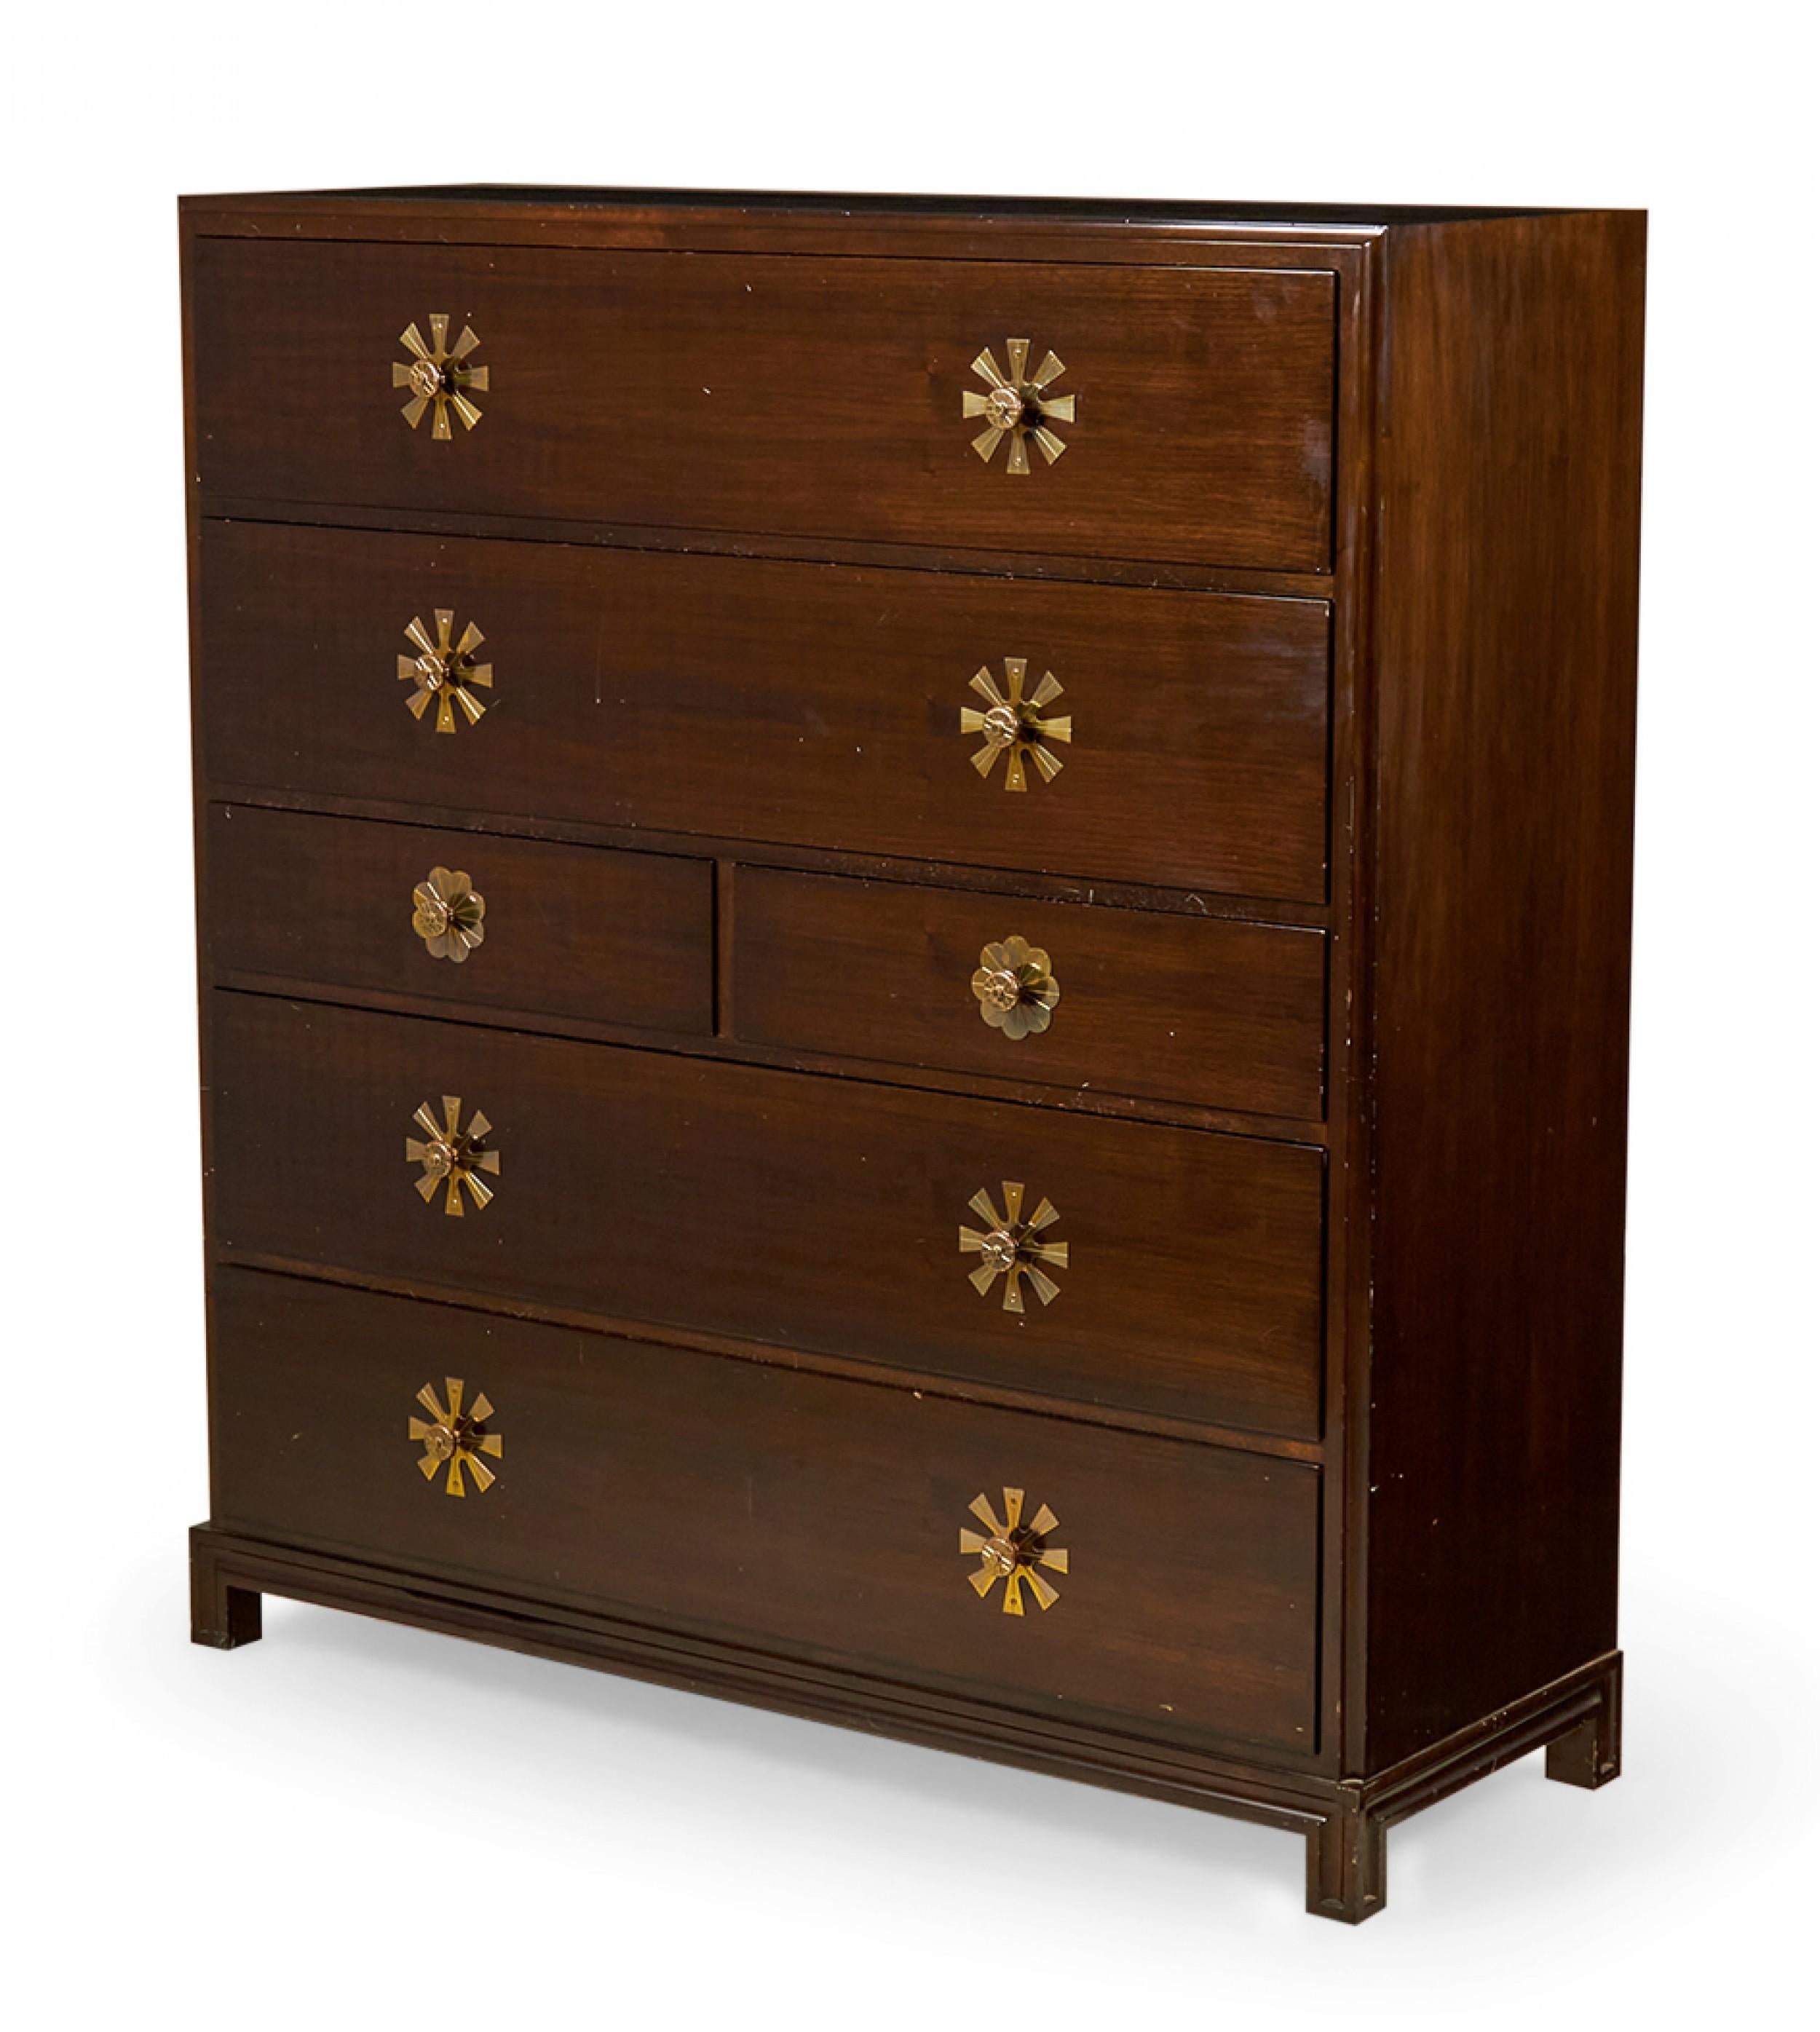 American Mid-Century (circa 1950) 6-drawer mahogany high chest with brass sunburst-form drawer pulls. (TOMMI PARZINGER FOR CHARAK ORIGINALS)
